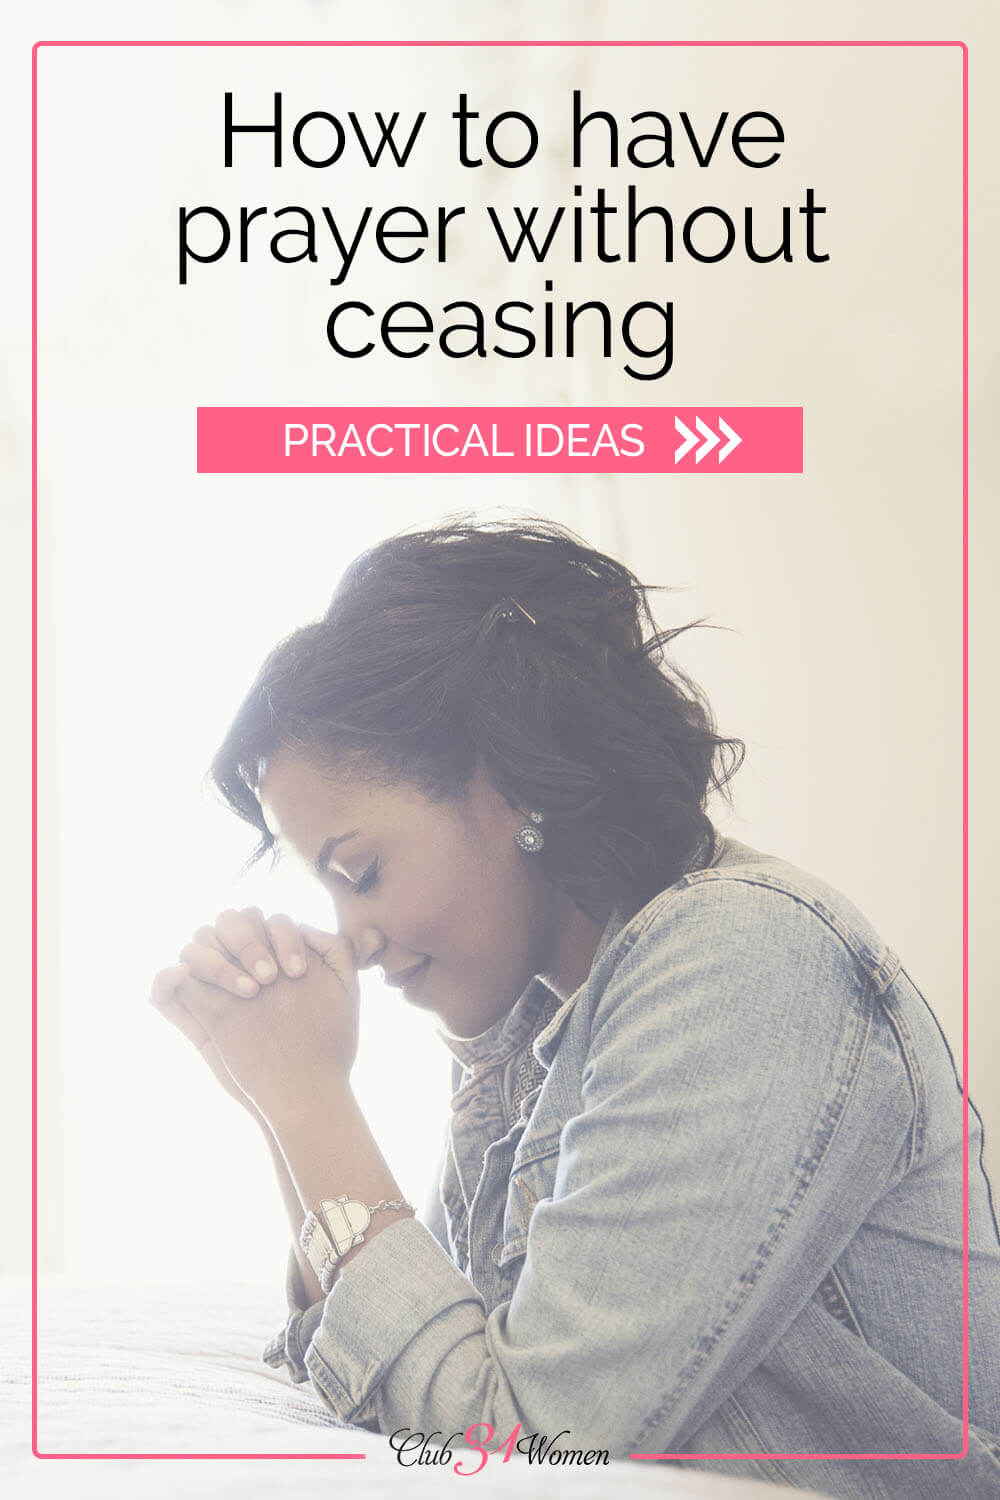 Prayer isn't a practice only for quiet spaces and closed doors. Prayer can be an ongoing conversation with God all day long. via @Club31Women